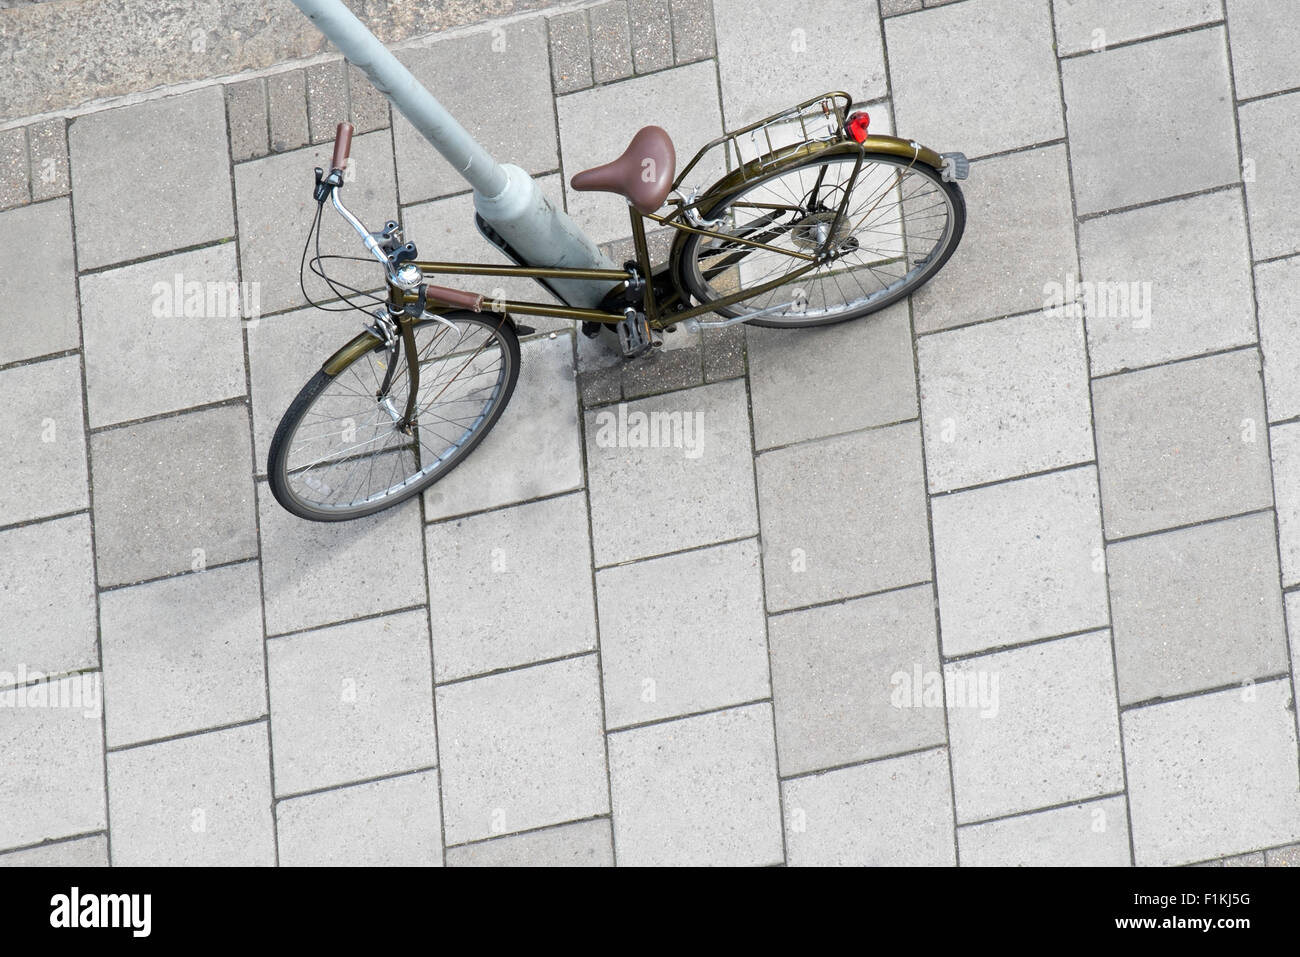 High viewpoint of bicycle leaning against lampost, Mornington Crescent, London Stock Photo